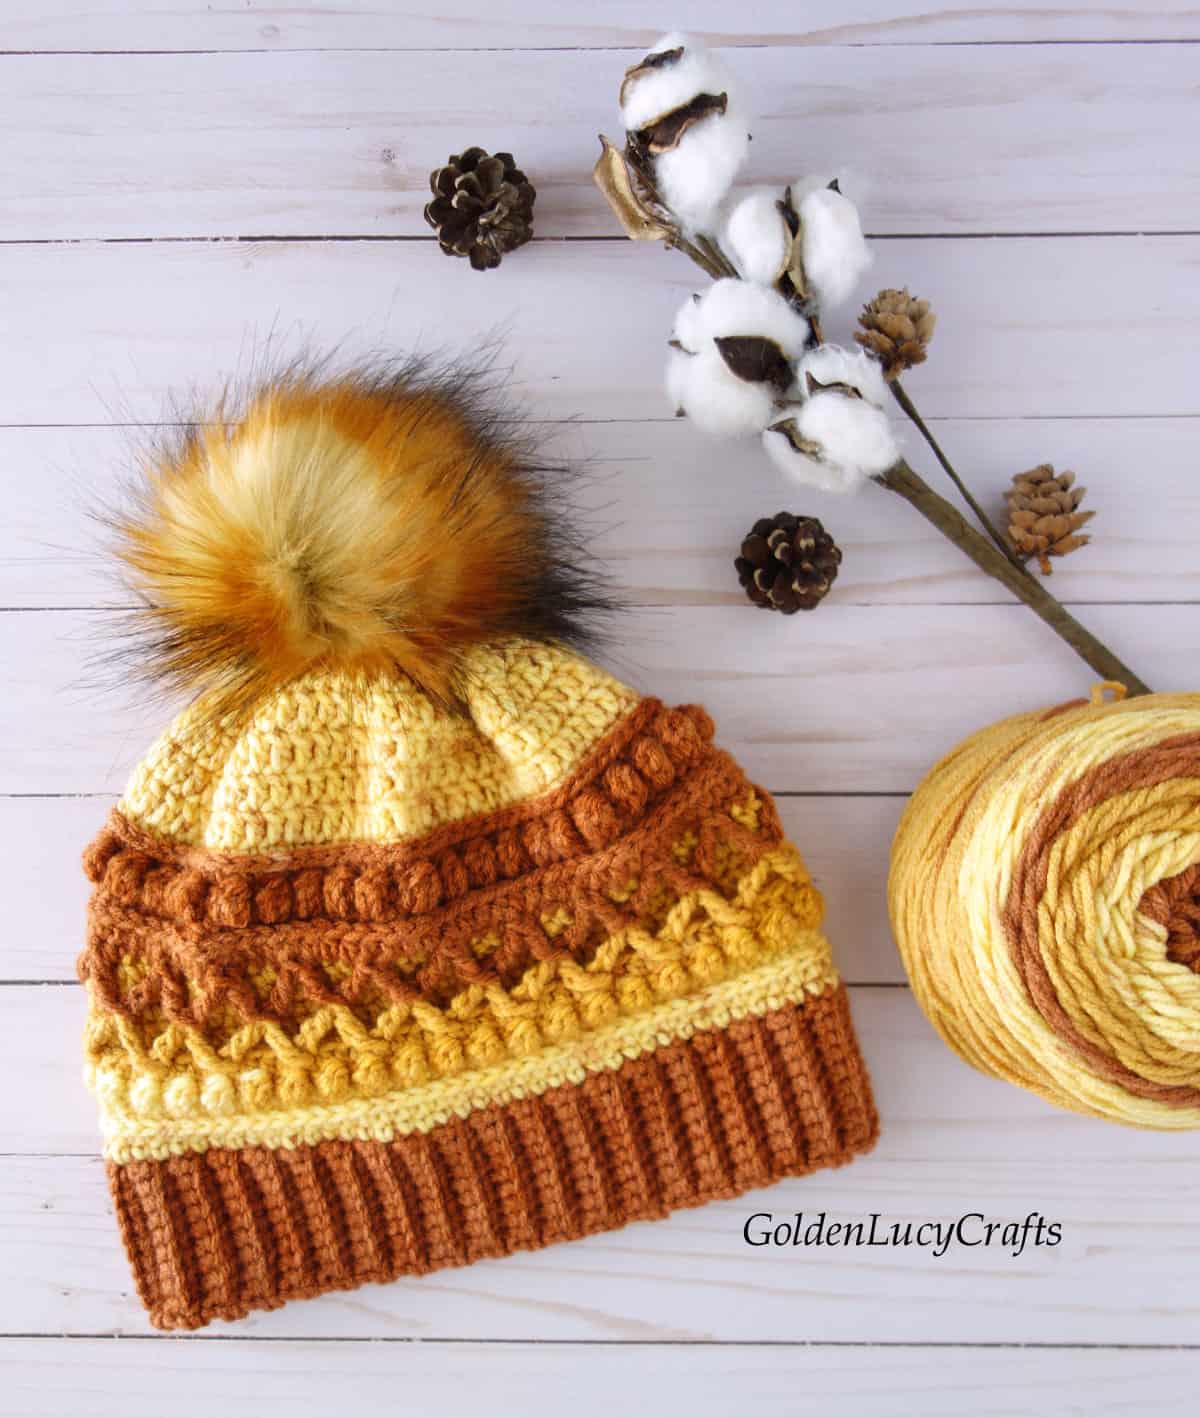 Crocheted hat in brown, orange and yellow colors embellished with fur pompom, ball of yarn, cotton branch, pine cones are laying on the flat surface.